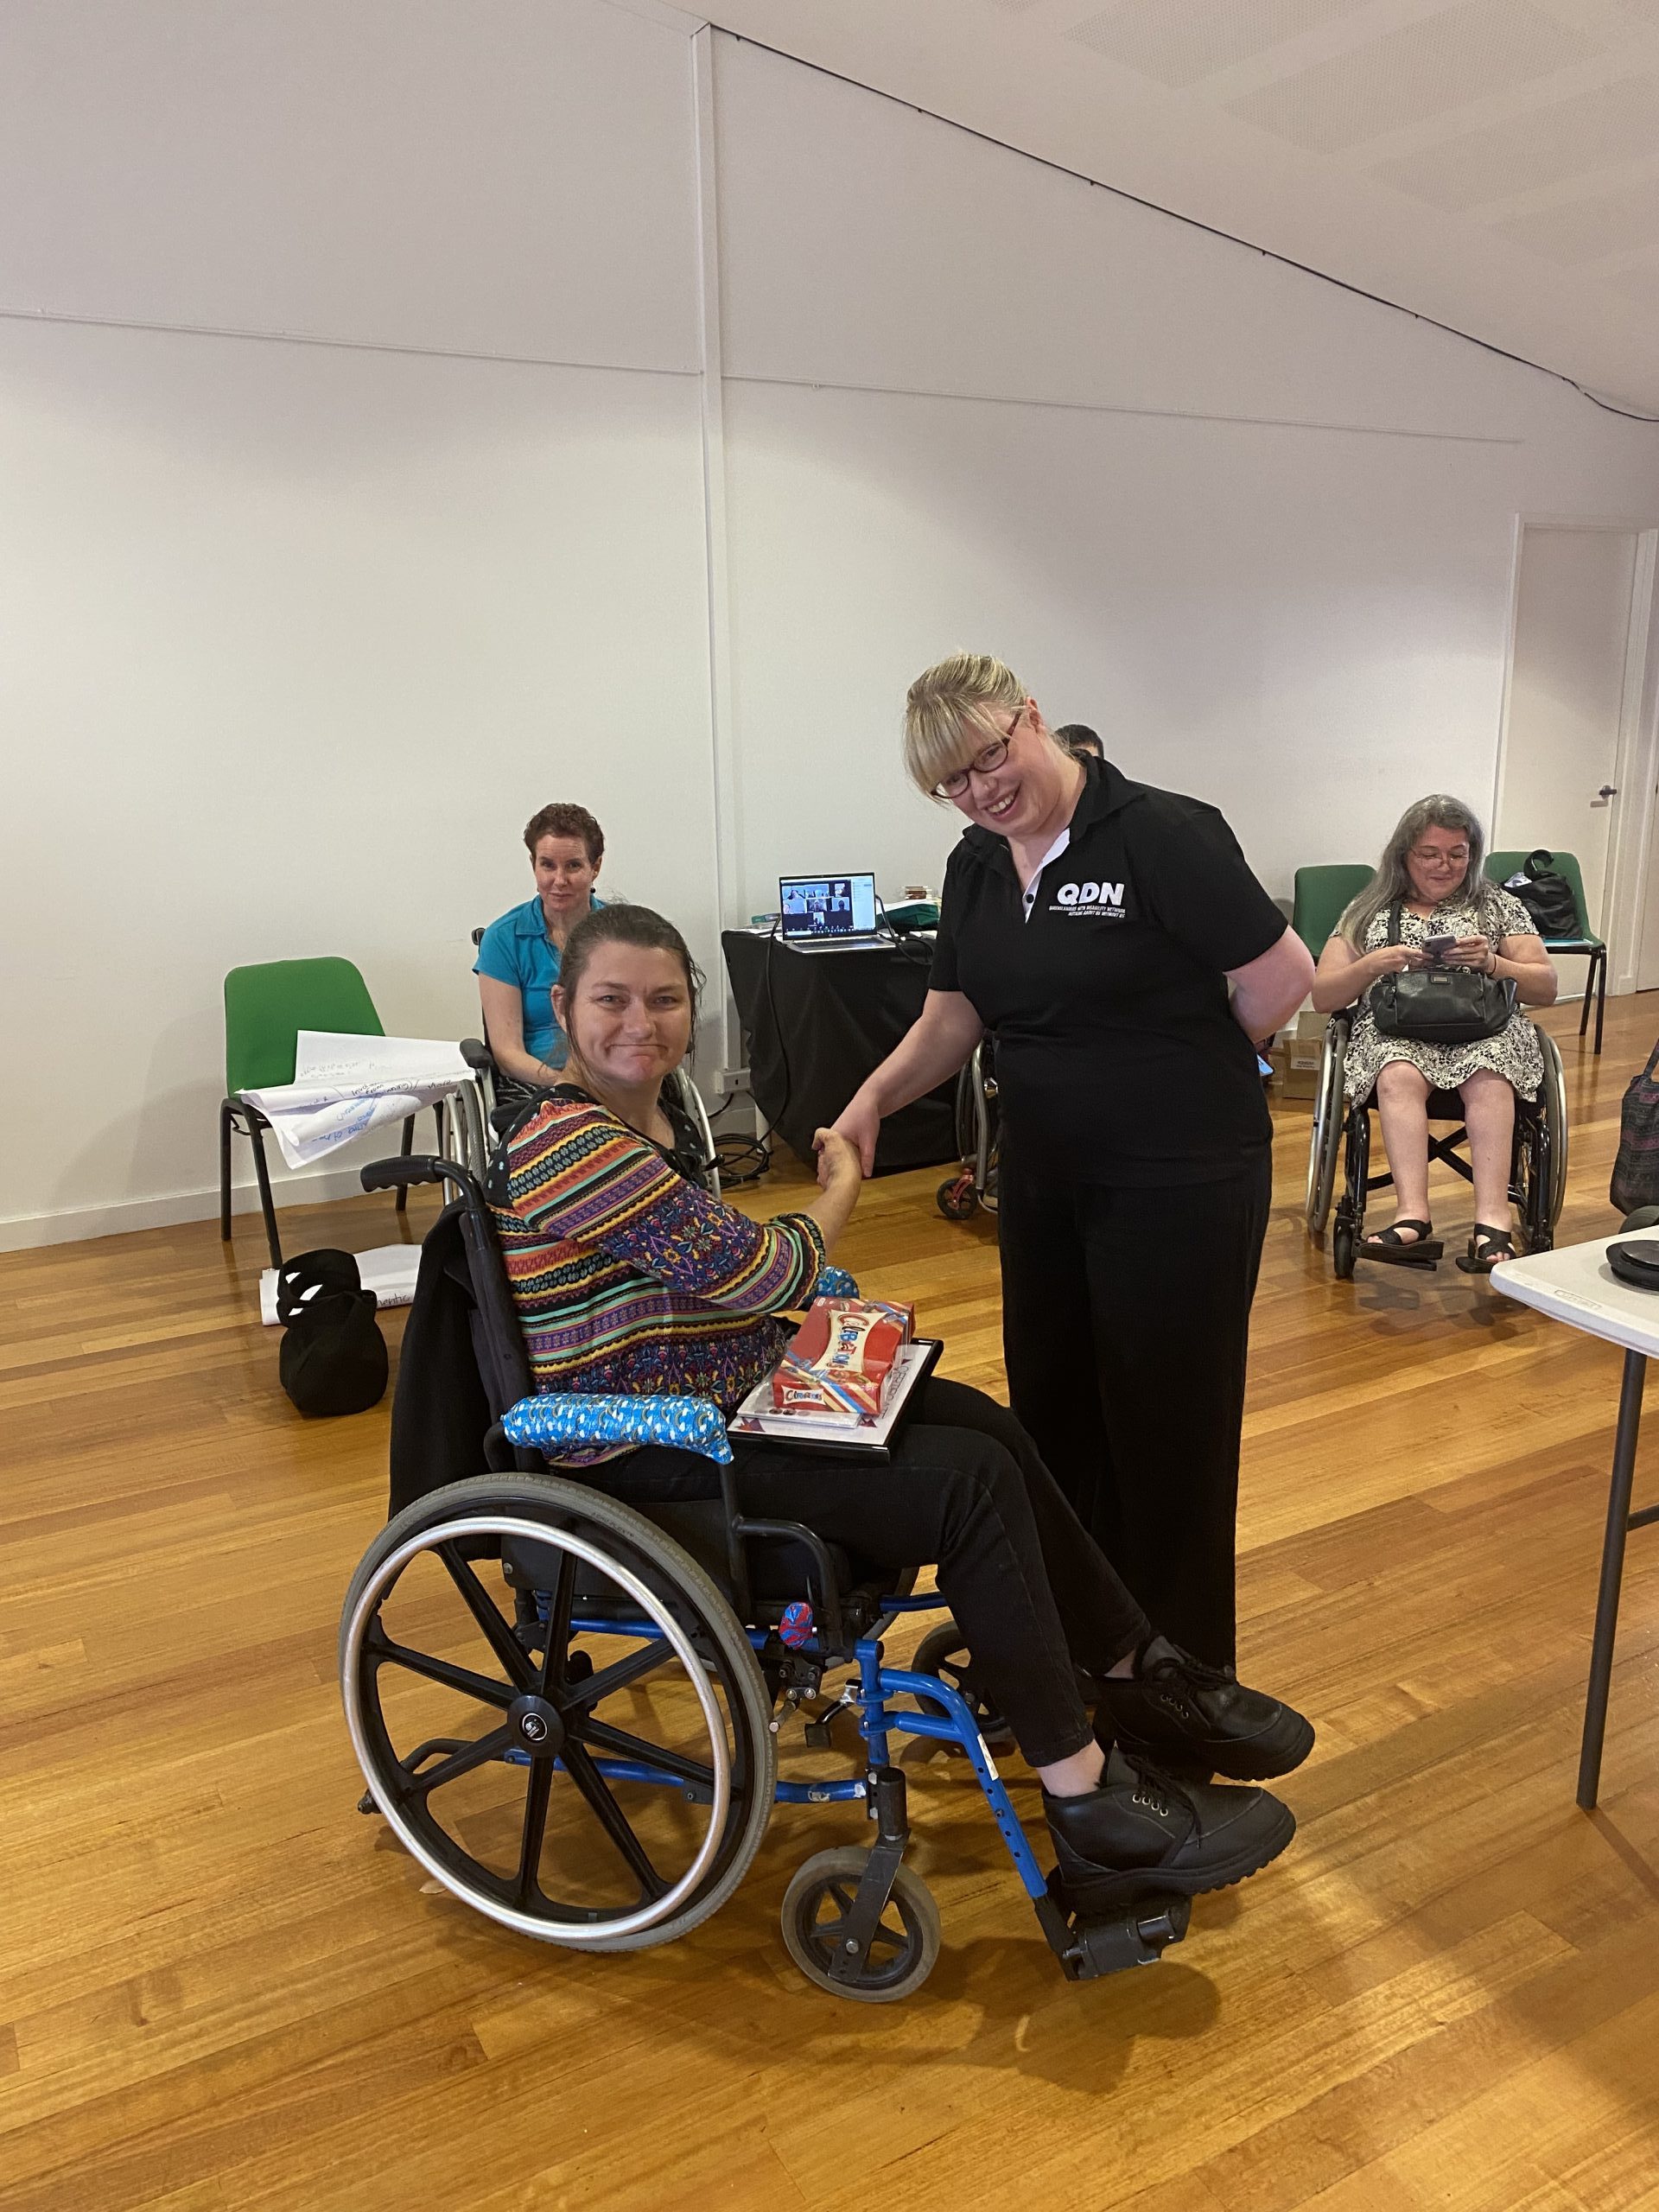 A woman in a striped colourful shirt, sitting in a wheel chair shaking hands with a lady standing wearing a QDN shirt. They are looking at the camera smiling.